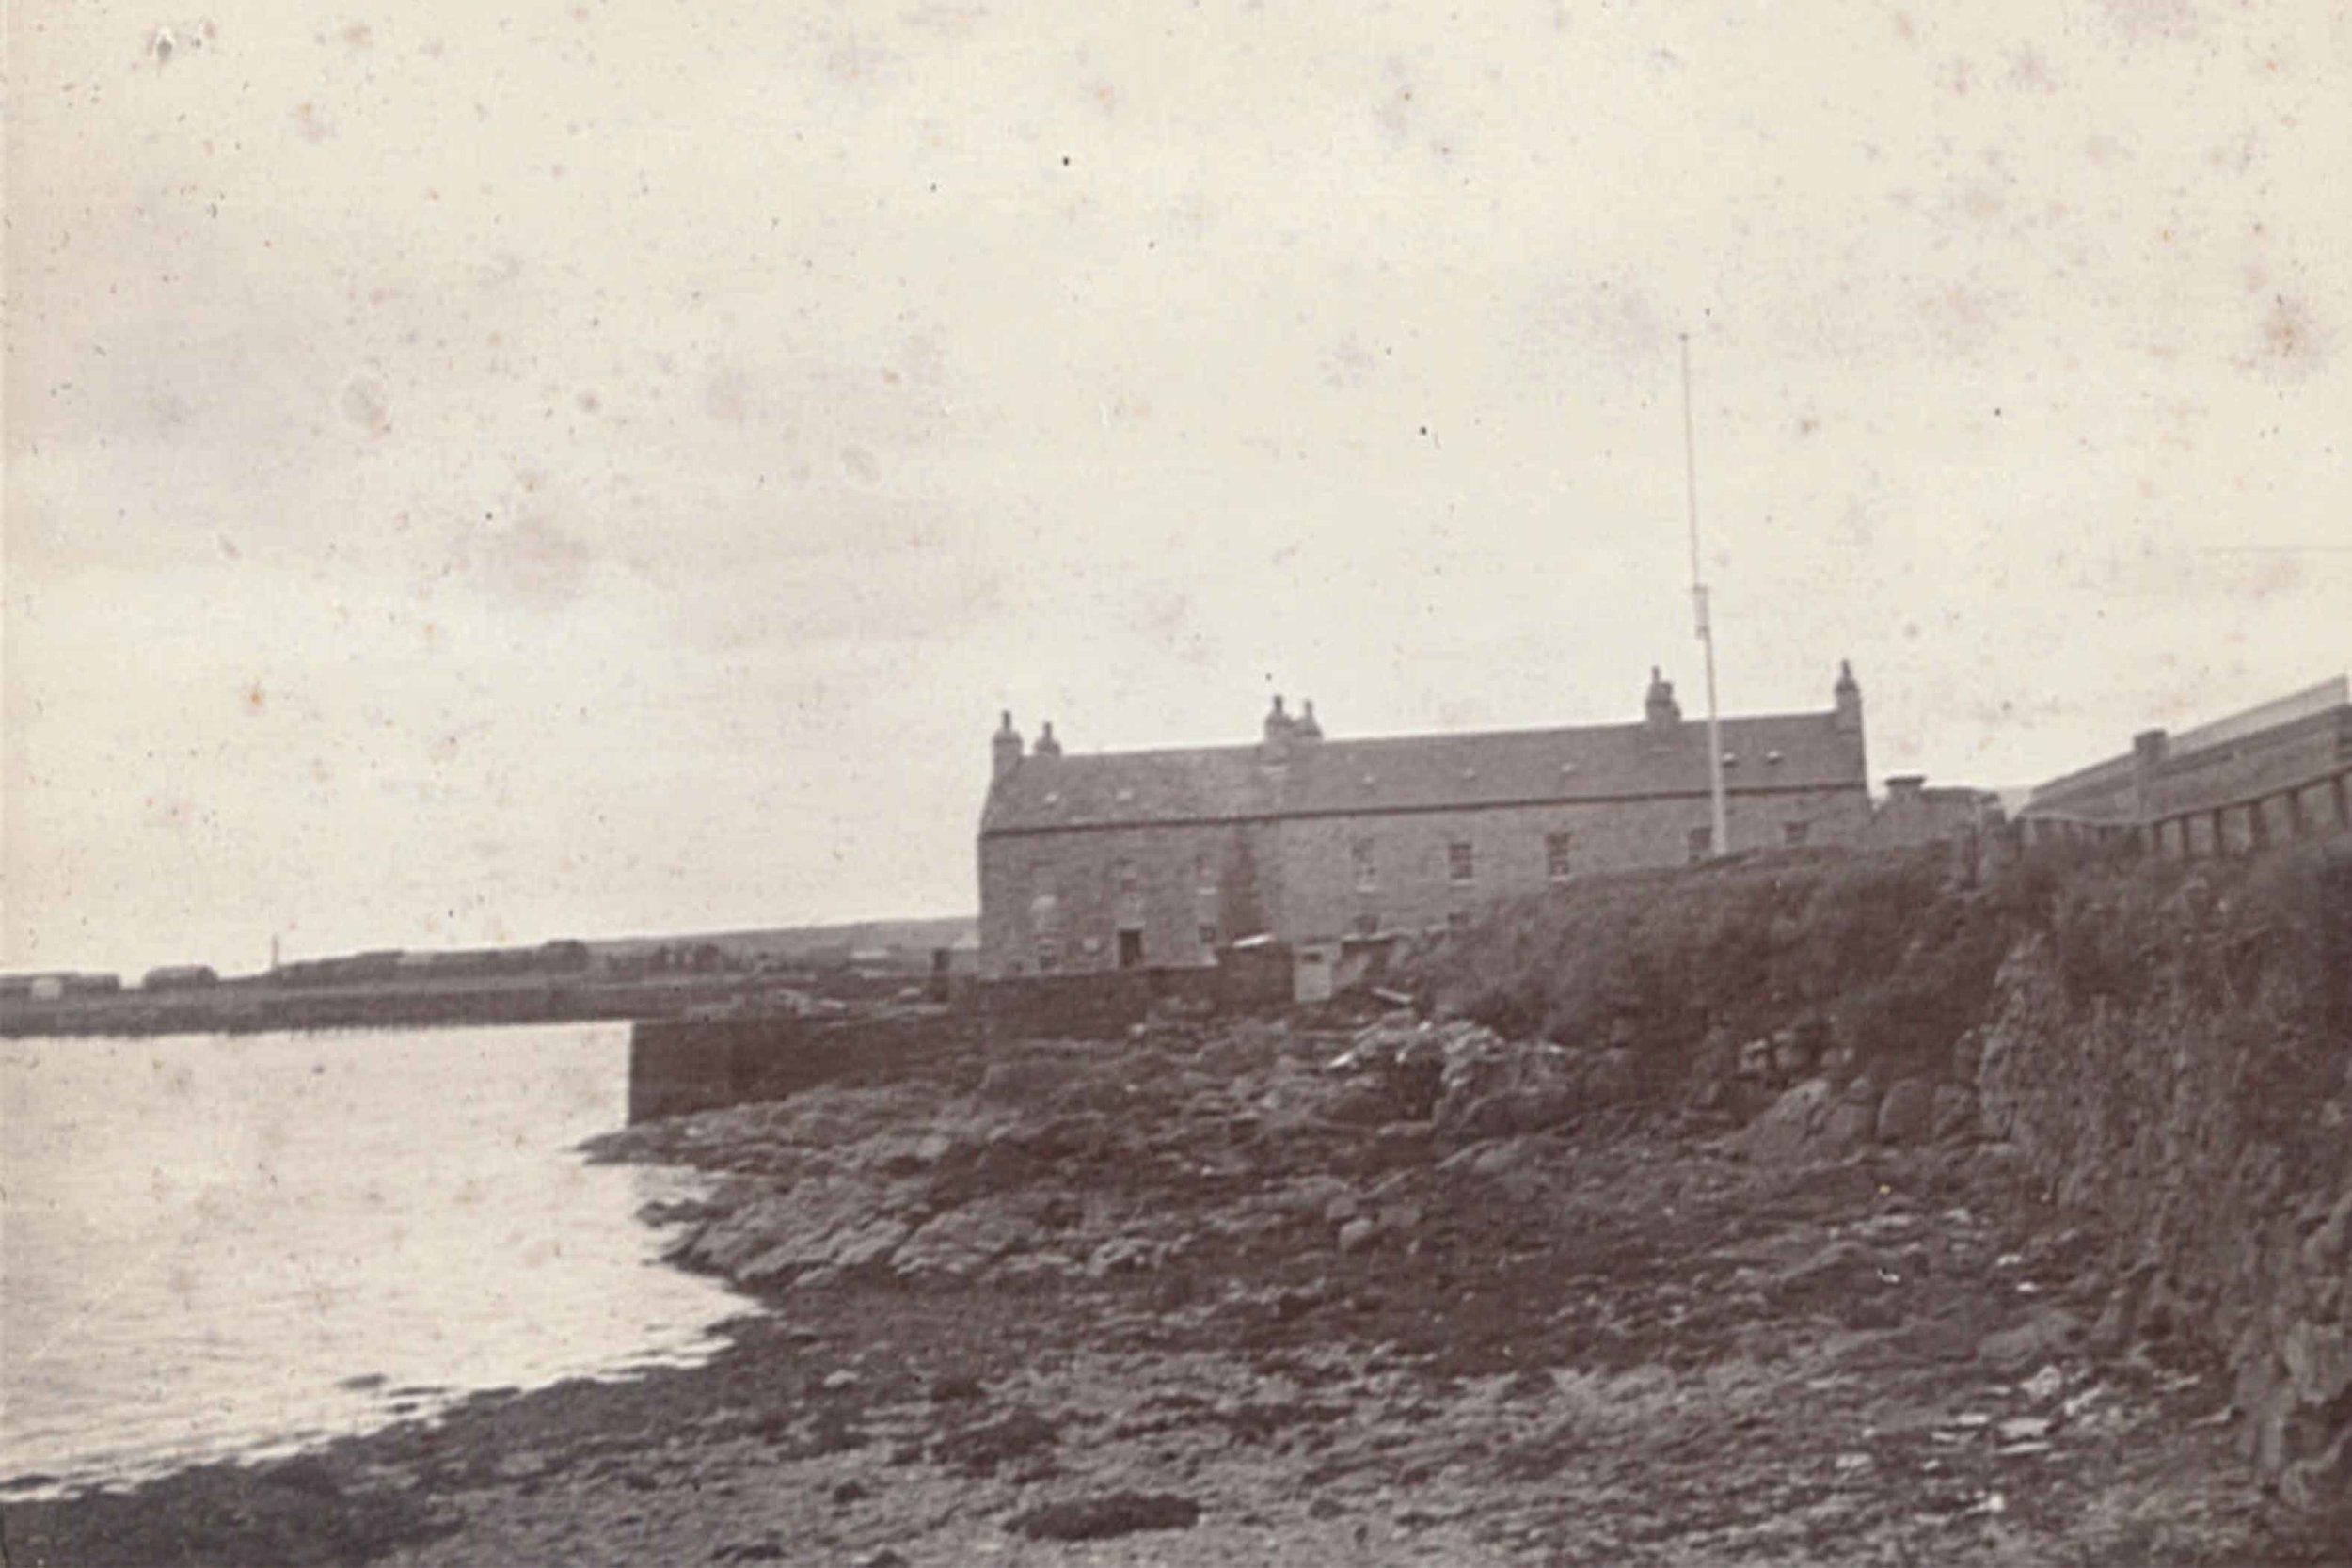 Image from Scarth family album, courtesy of the Skaill House Archive.